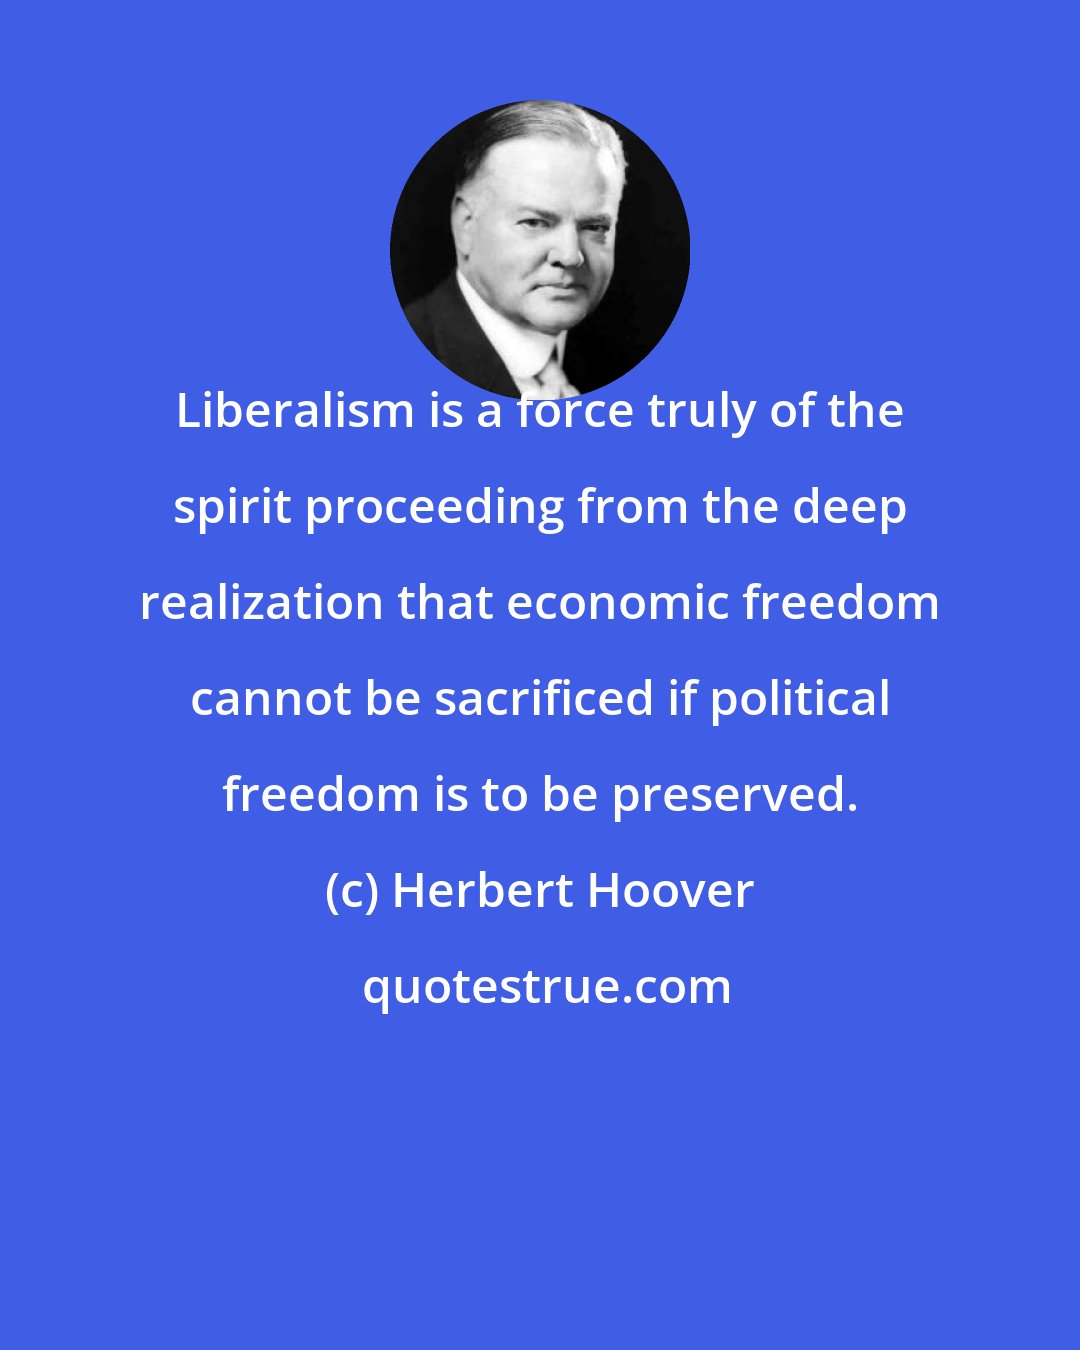 Herbert Hoover: Liberalism is a force truly of the spirit proceeding from the deep realization that economic freedom cannot be sacrificed if political freedom is to be preserved.